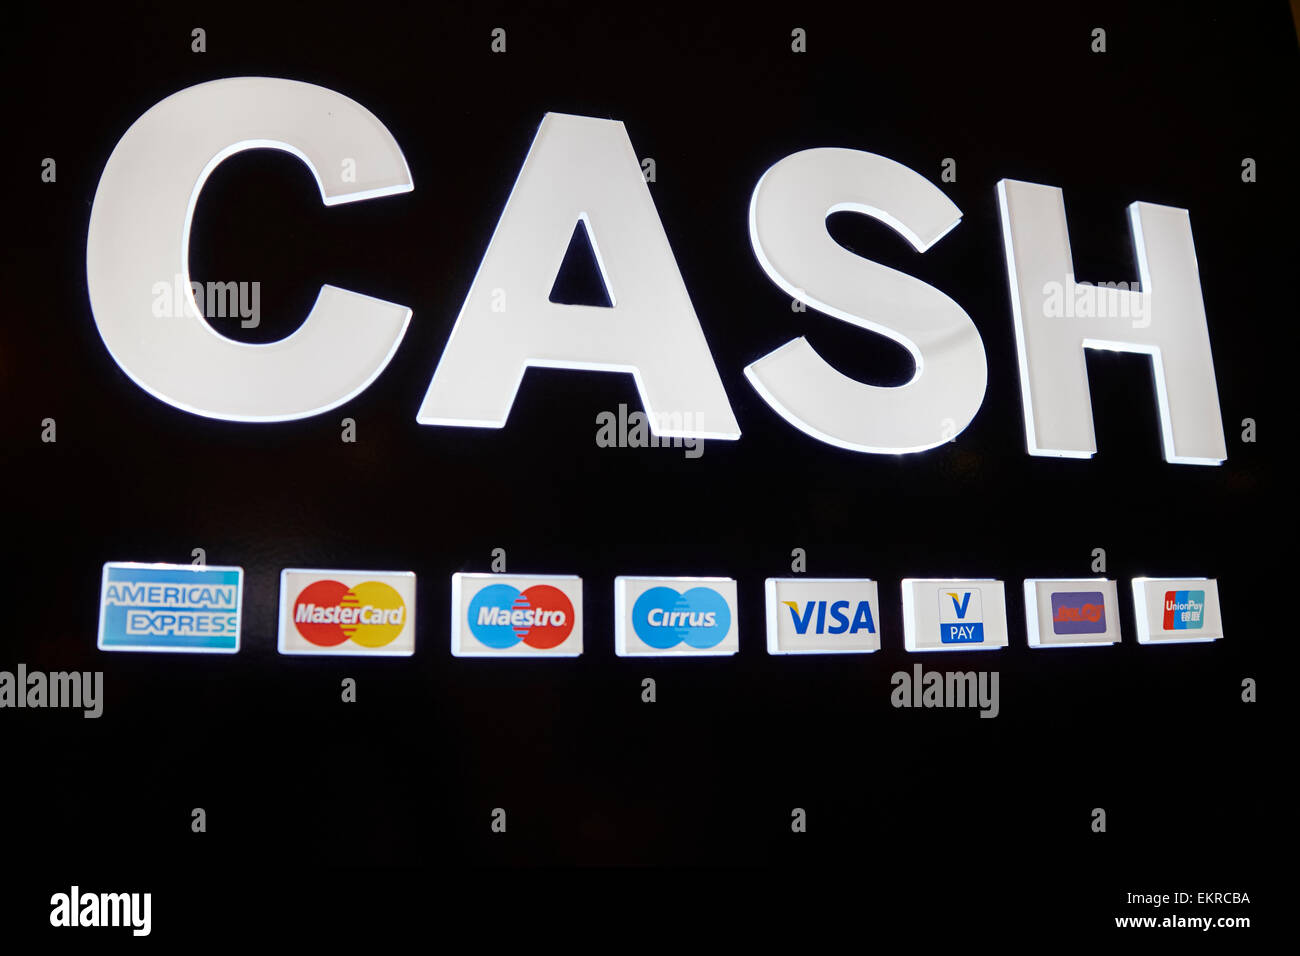 Cash Sign Above An ATM With The Logos Of Major Credit Cards Birmingham Airport UK Stock Photo